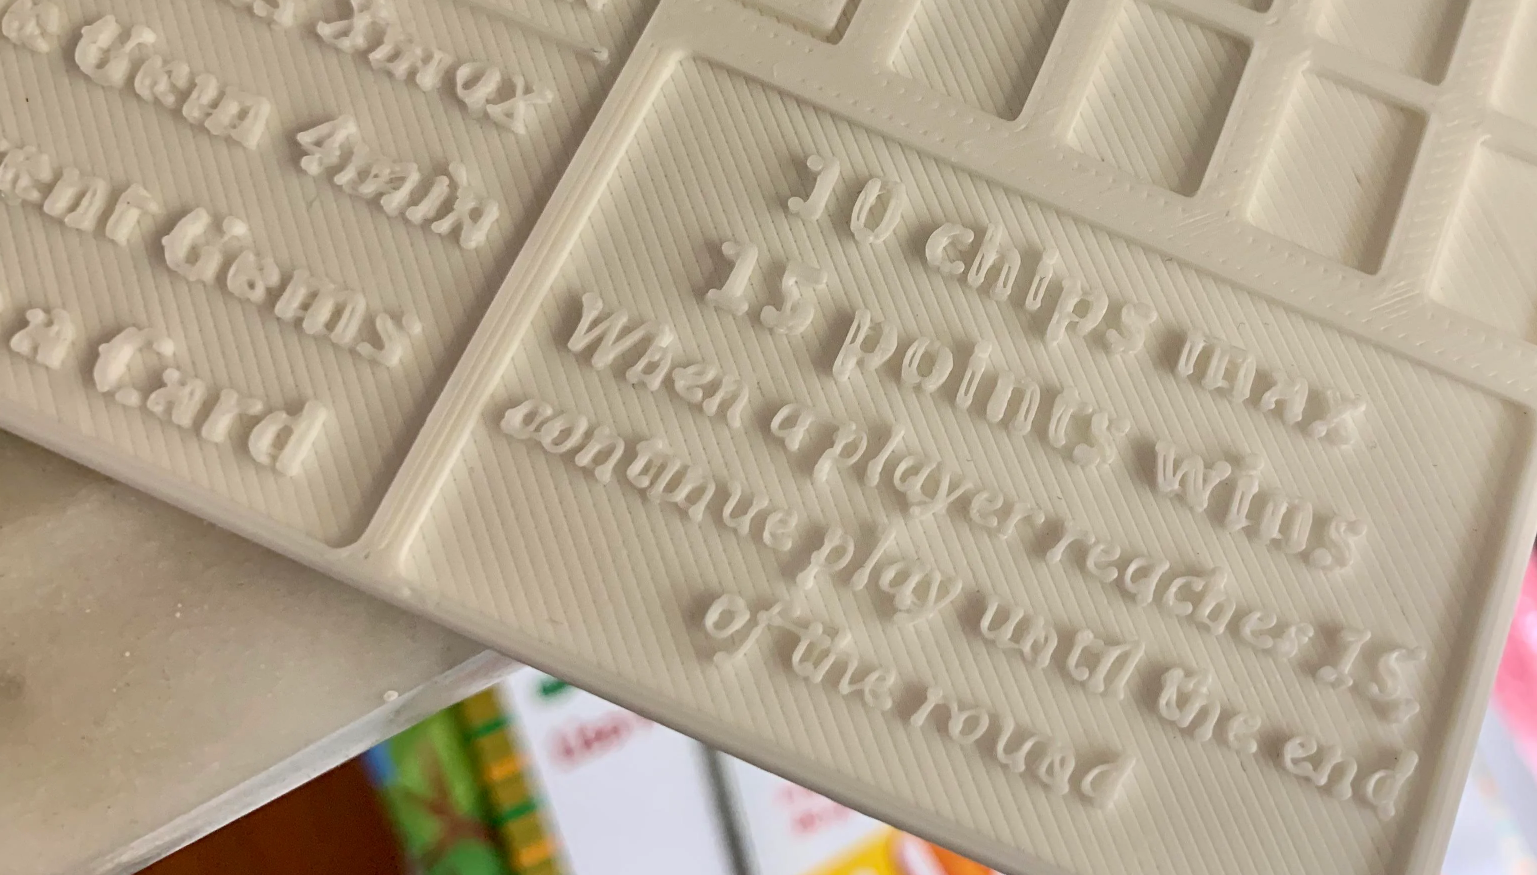 How To 3D Print Letters & Text (10 Easy Steps)